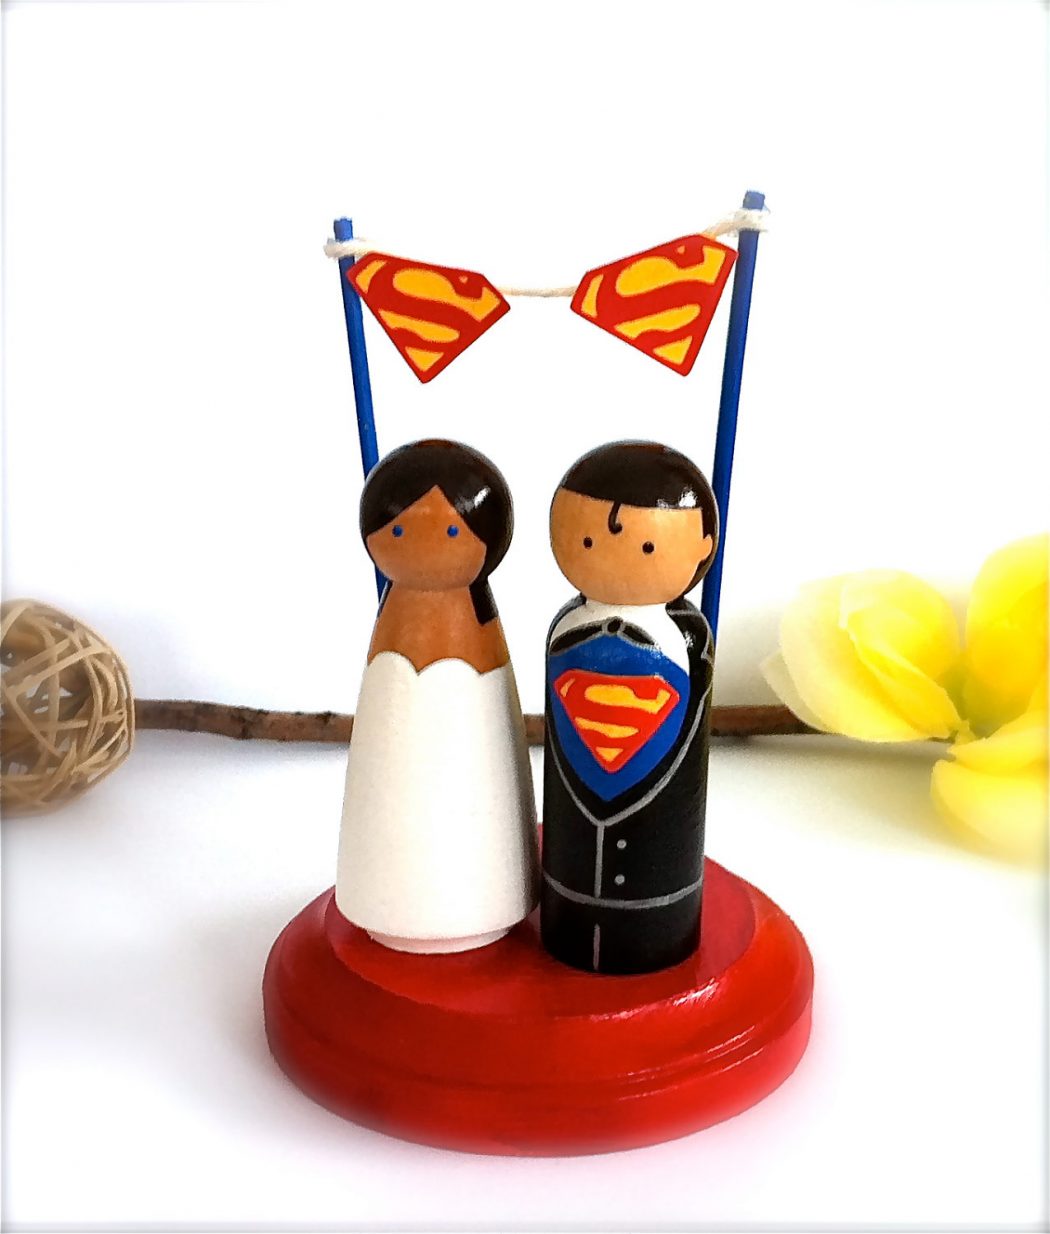 317564-superman-wedding-cake-topper-with-superman-by-creativebutterflyxox Top 10 Most Unique and Funny Wedding Cake Toppers 2019